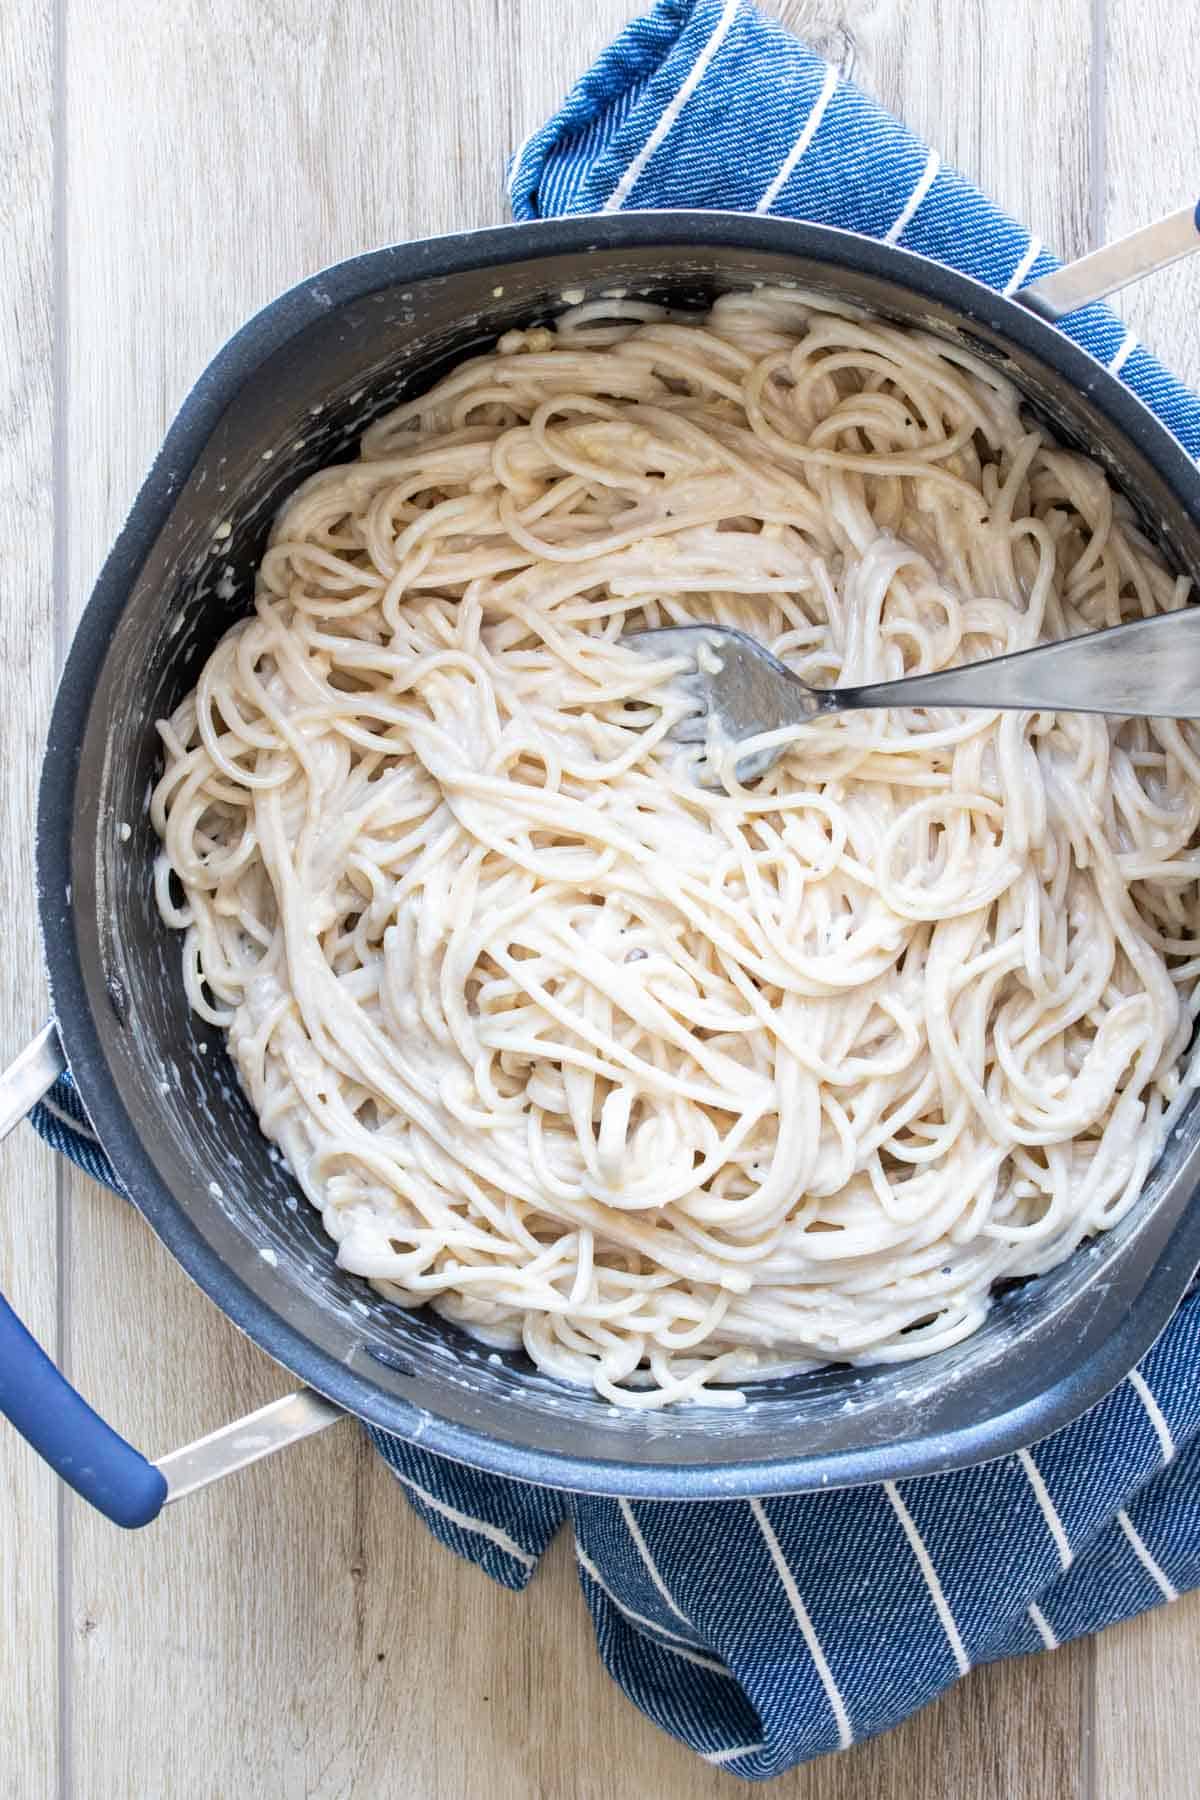 Pot with spaghetti and carbonara sauce being mixed by a fork